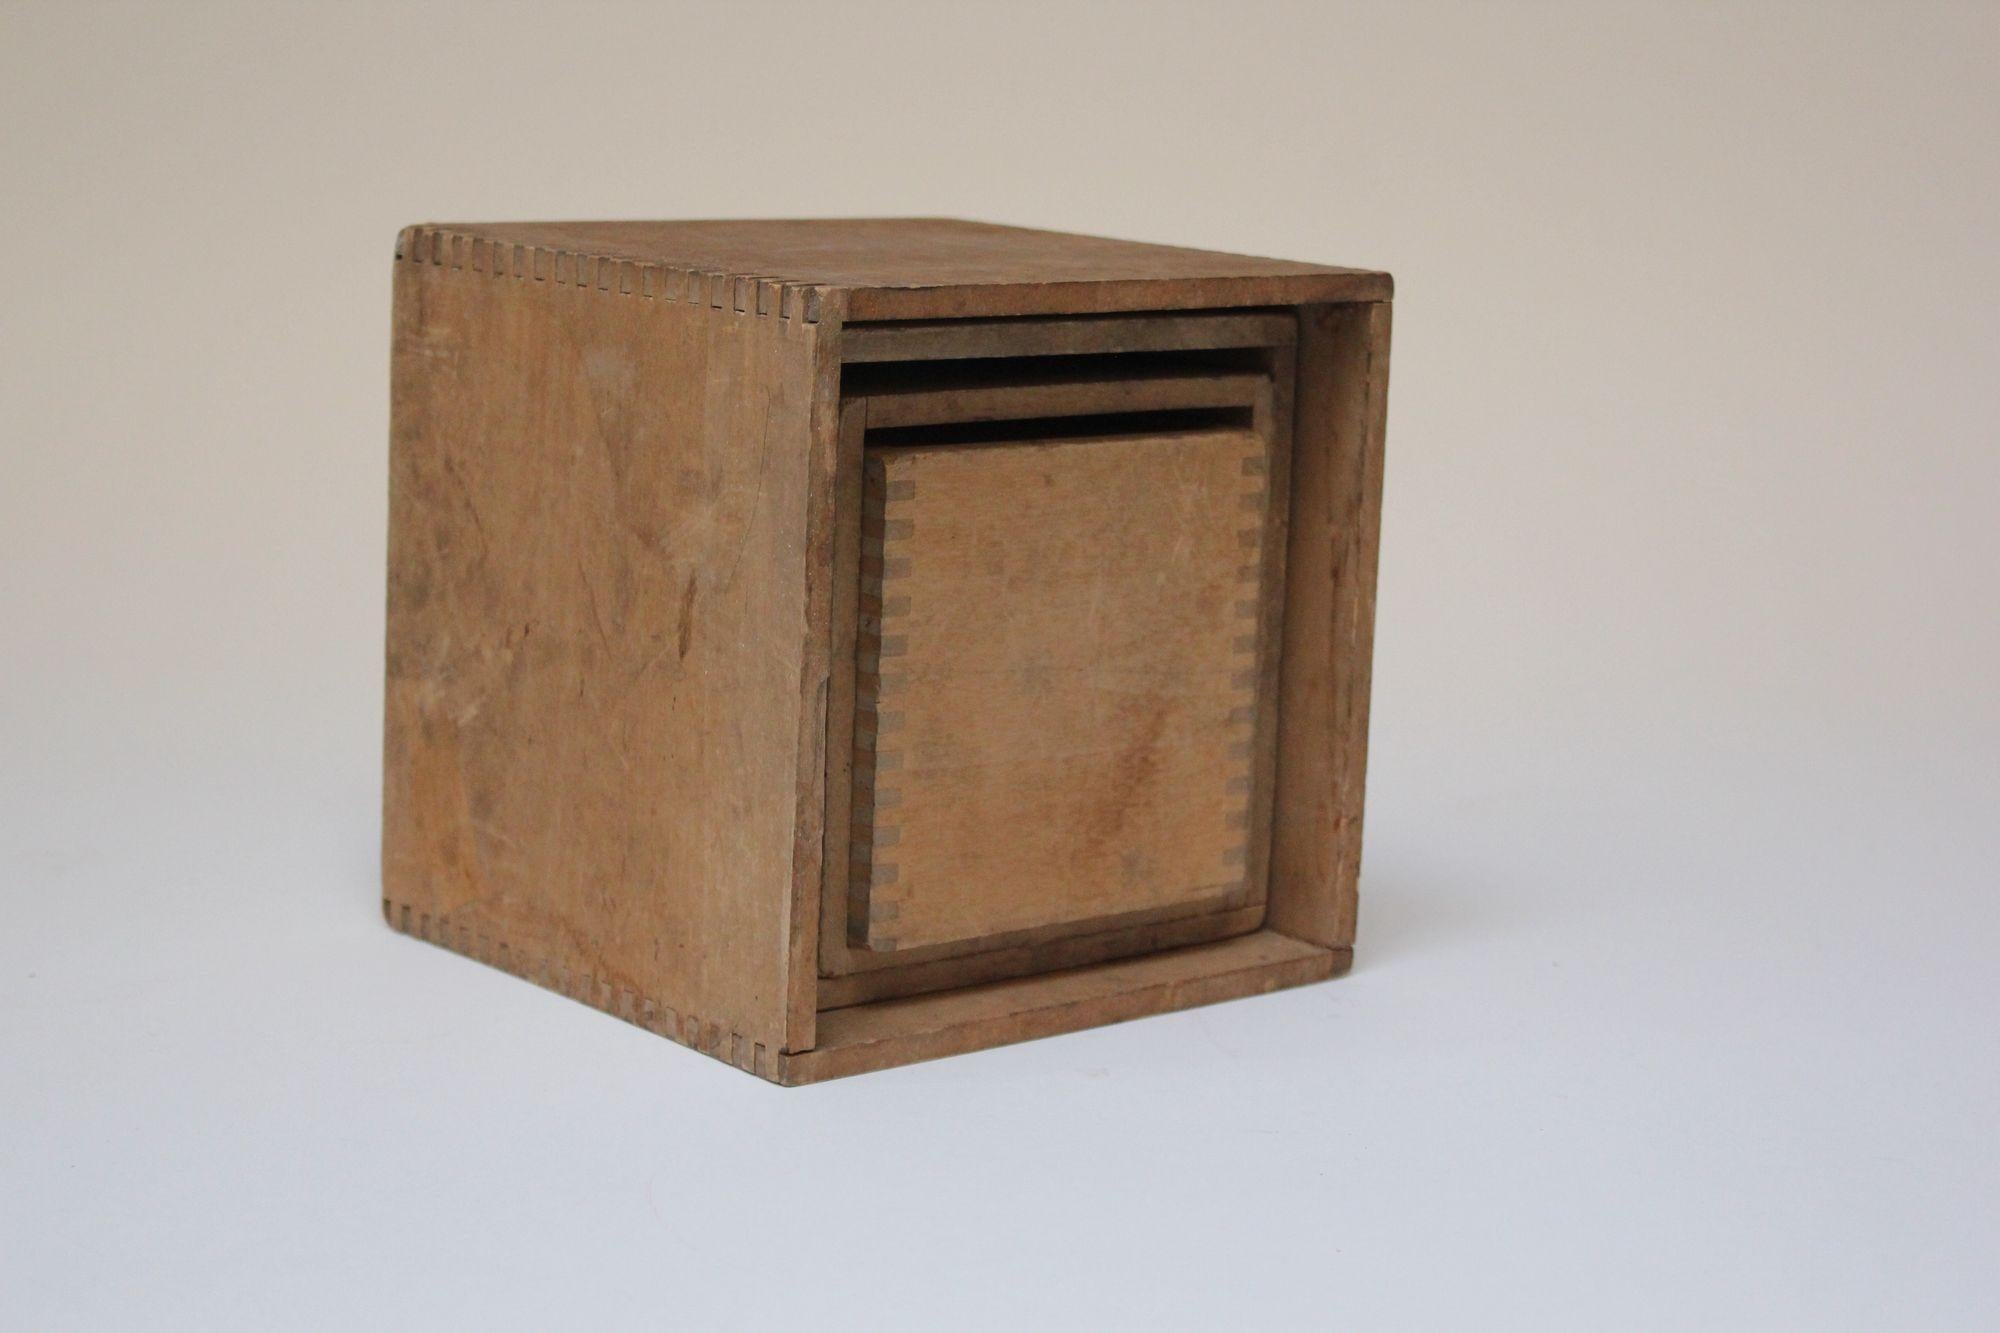 Primitive set of seven blocks and boxes (some four-sided, some two) which nest in the largest box (ca. early 20th Century, USA).
Thoughtfully crafted with finger jointed-edges and unique design details.
More complex assembly than a typical nesting